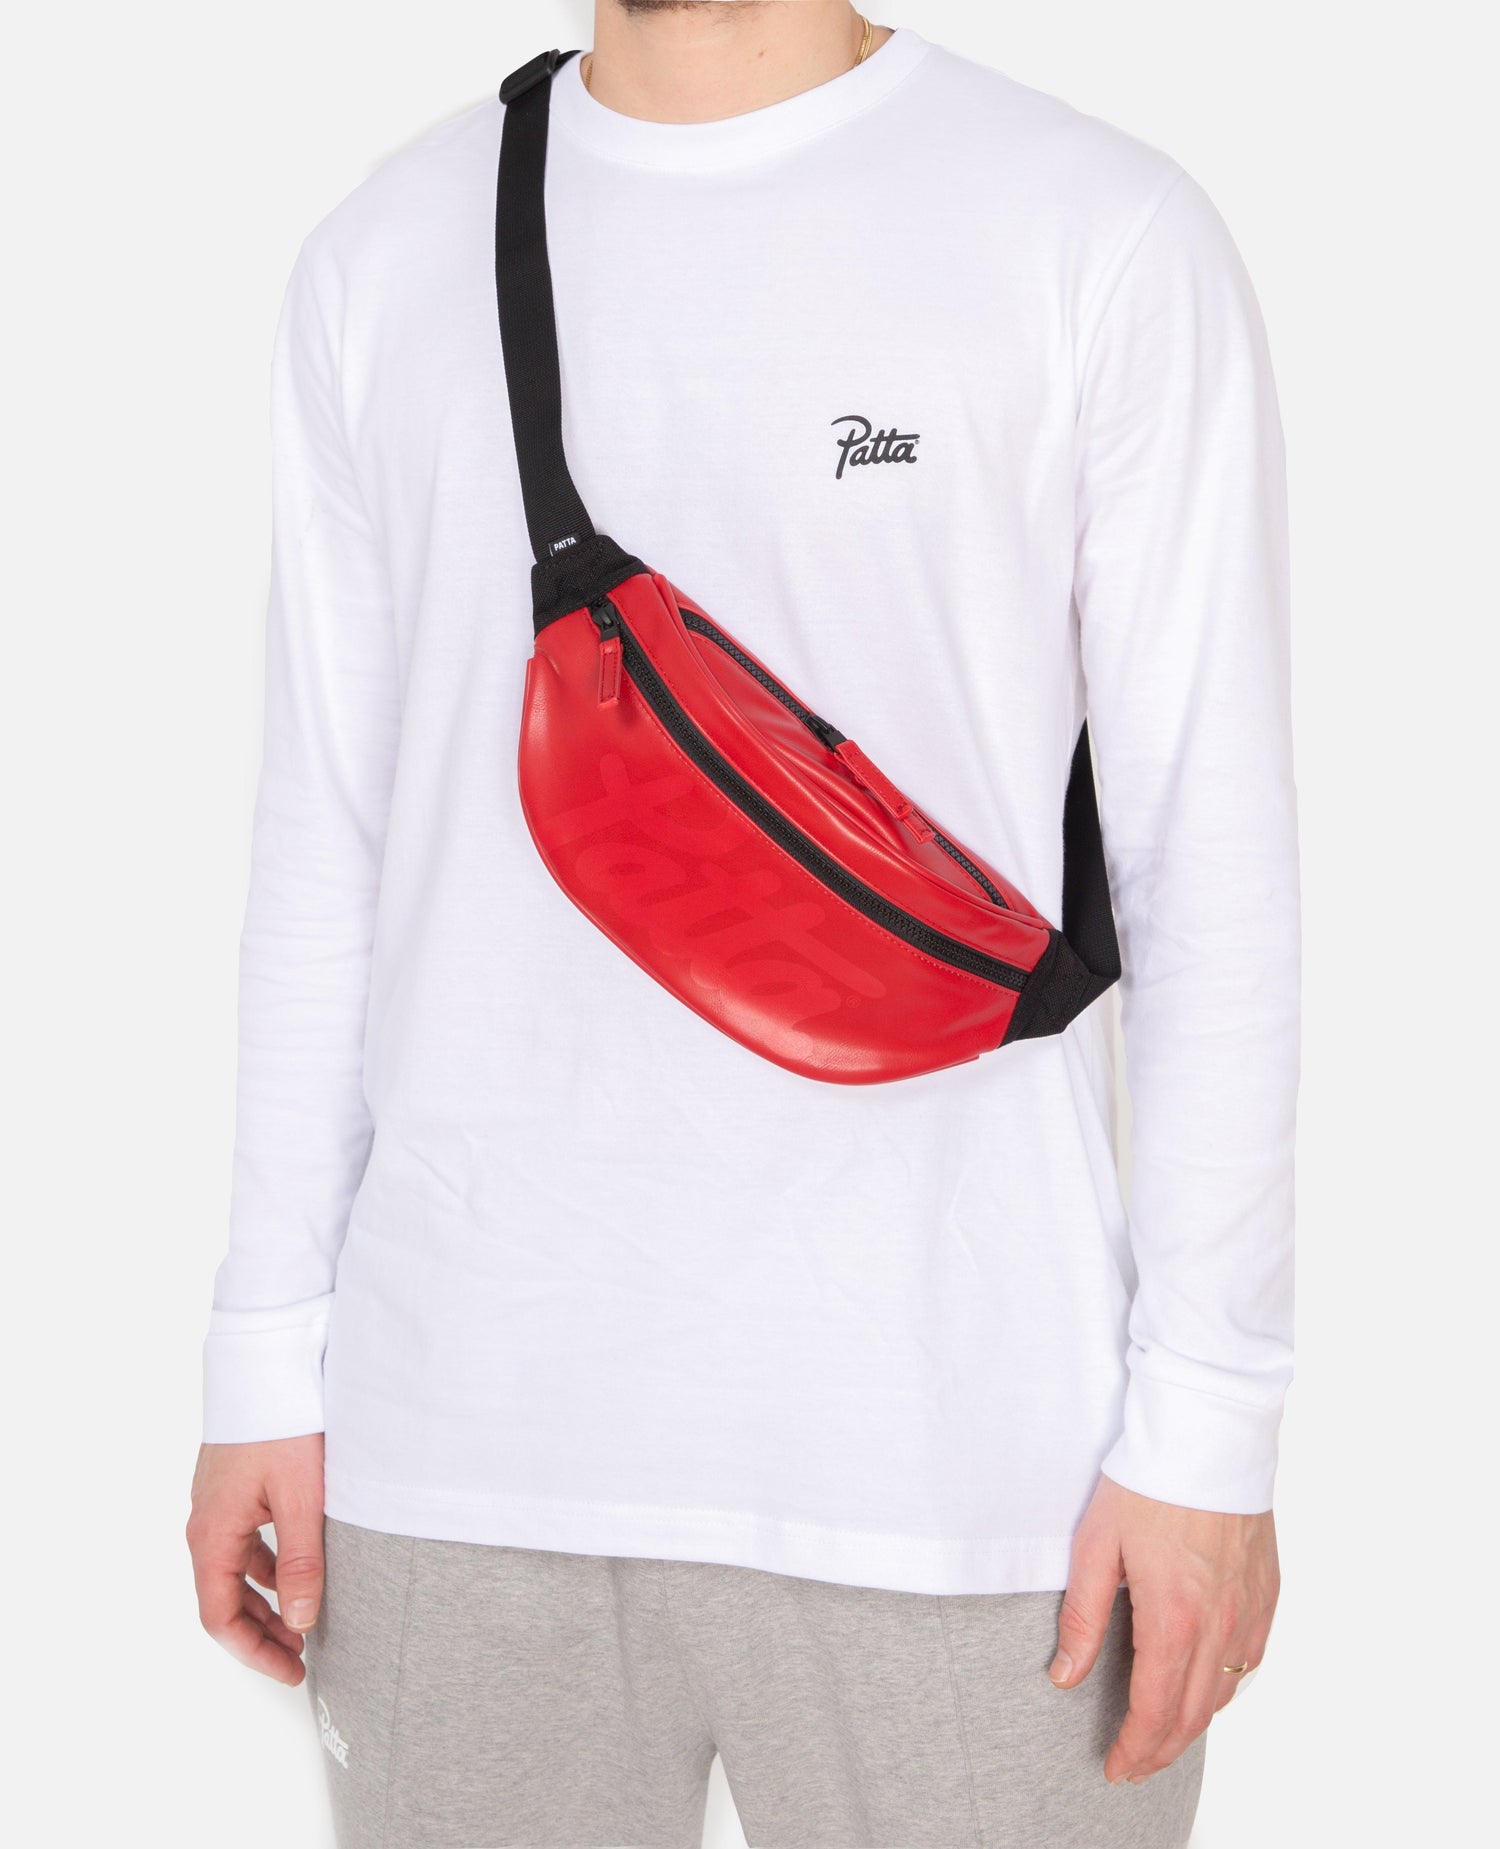 Patta Faux Leather Waistbag (High Risk Red)